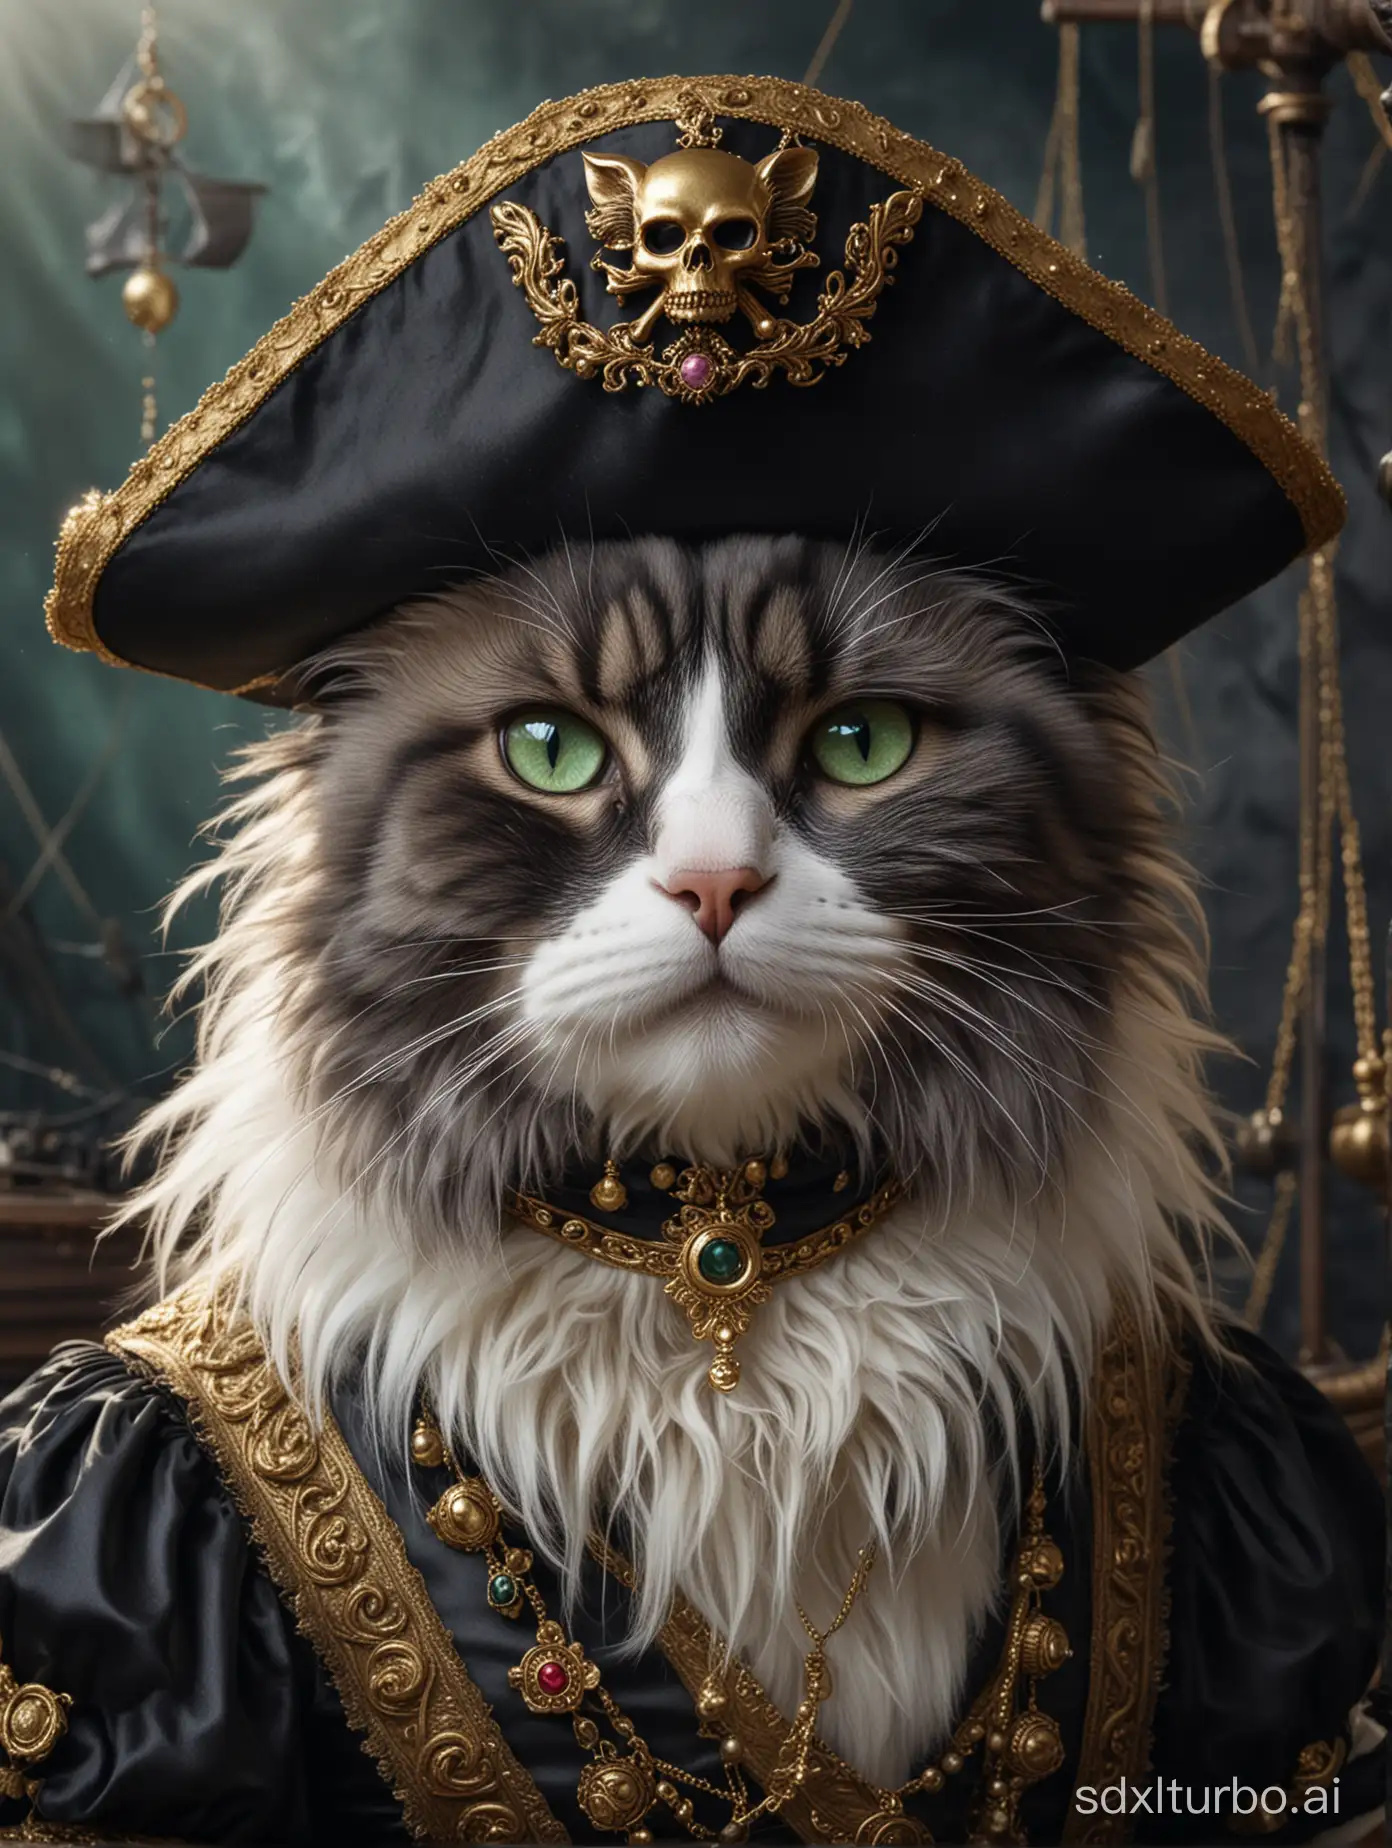 Aristocratic-Pirate-Cat-Captain-with-Celestial-Jewels-and-Gold-Ornaments